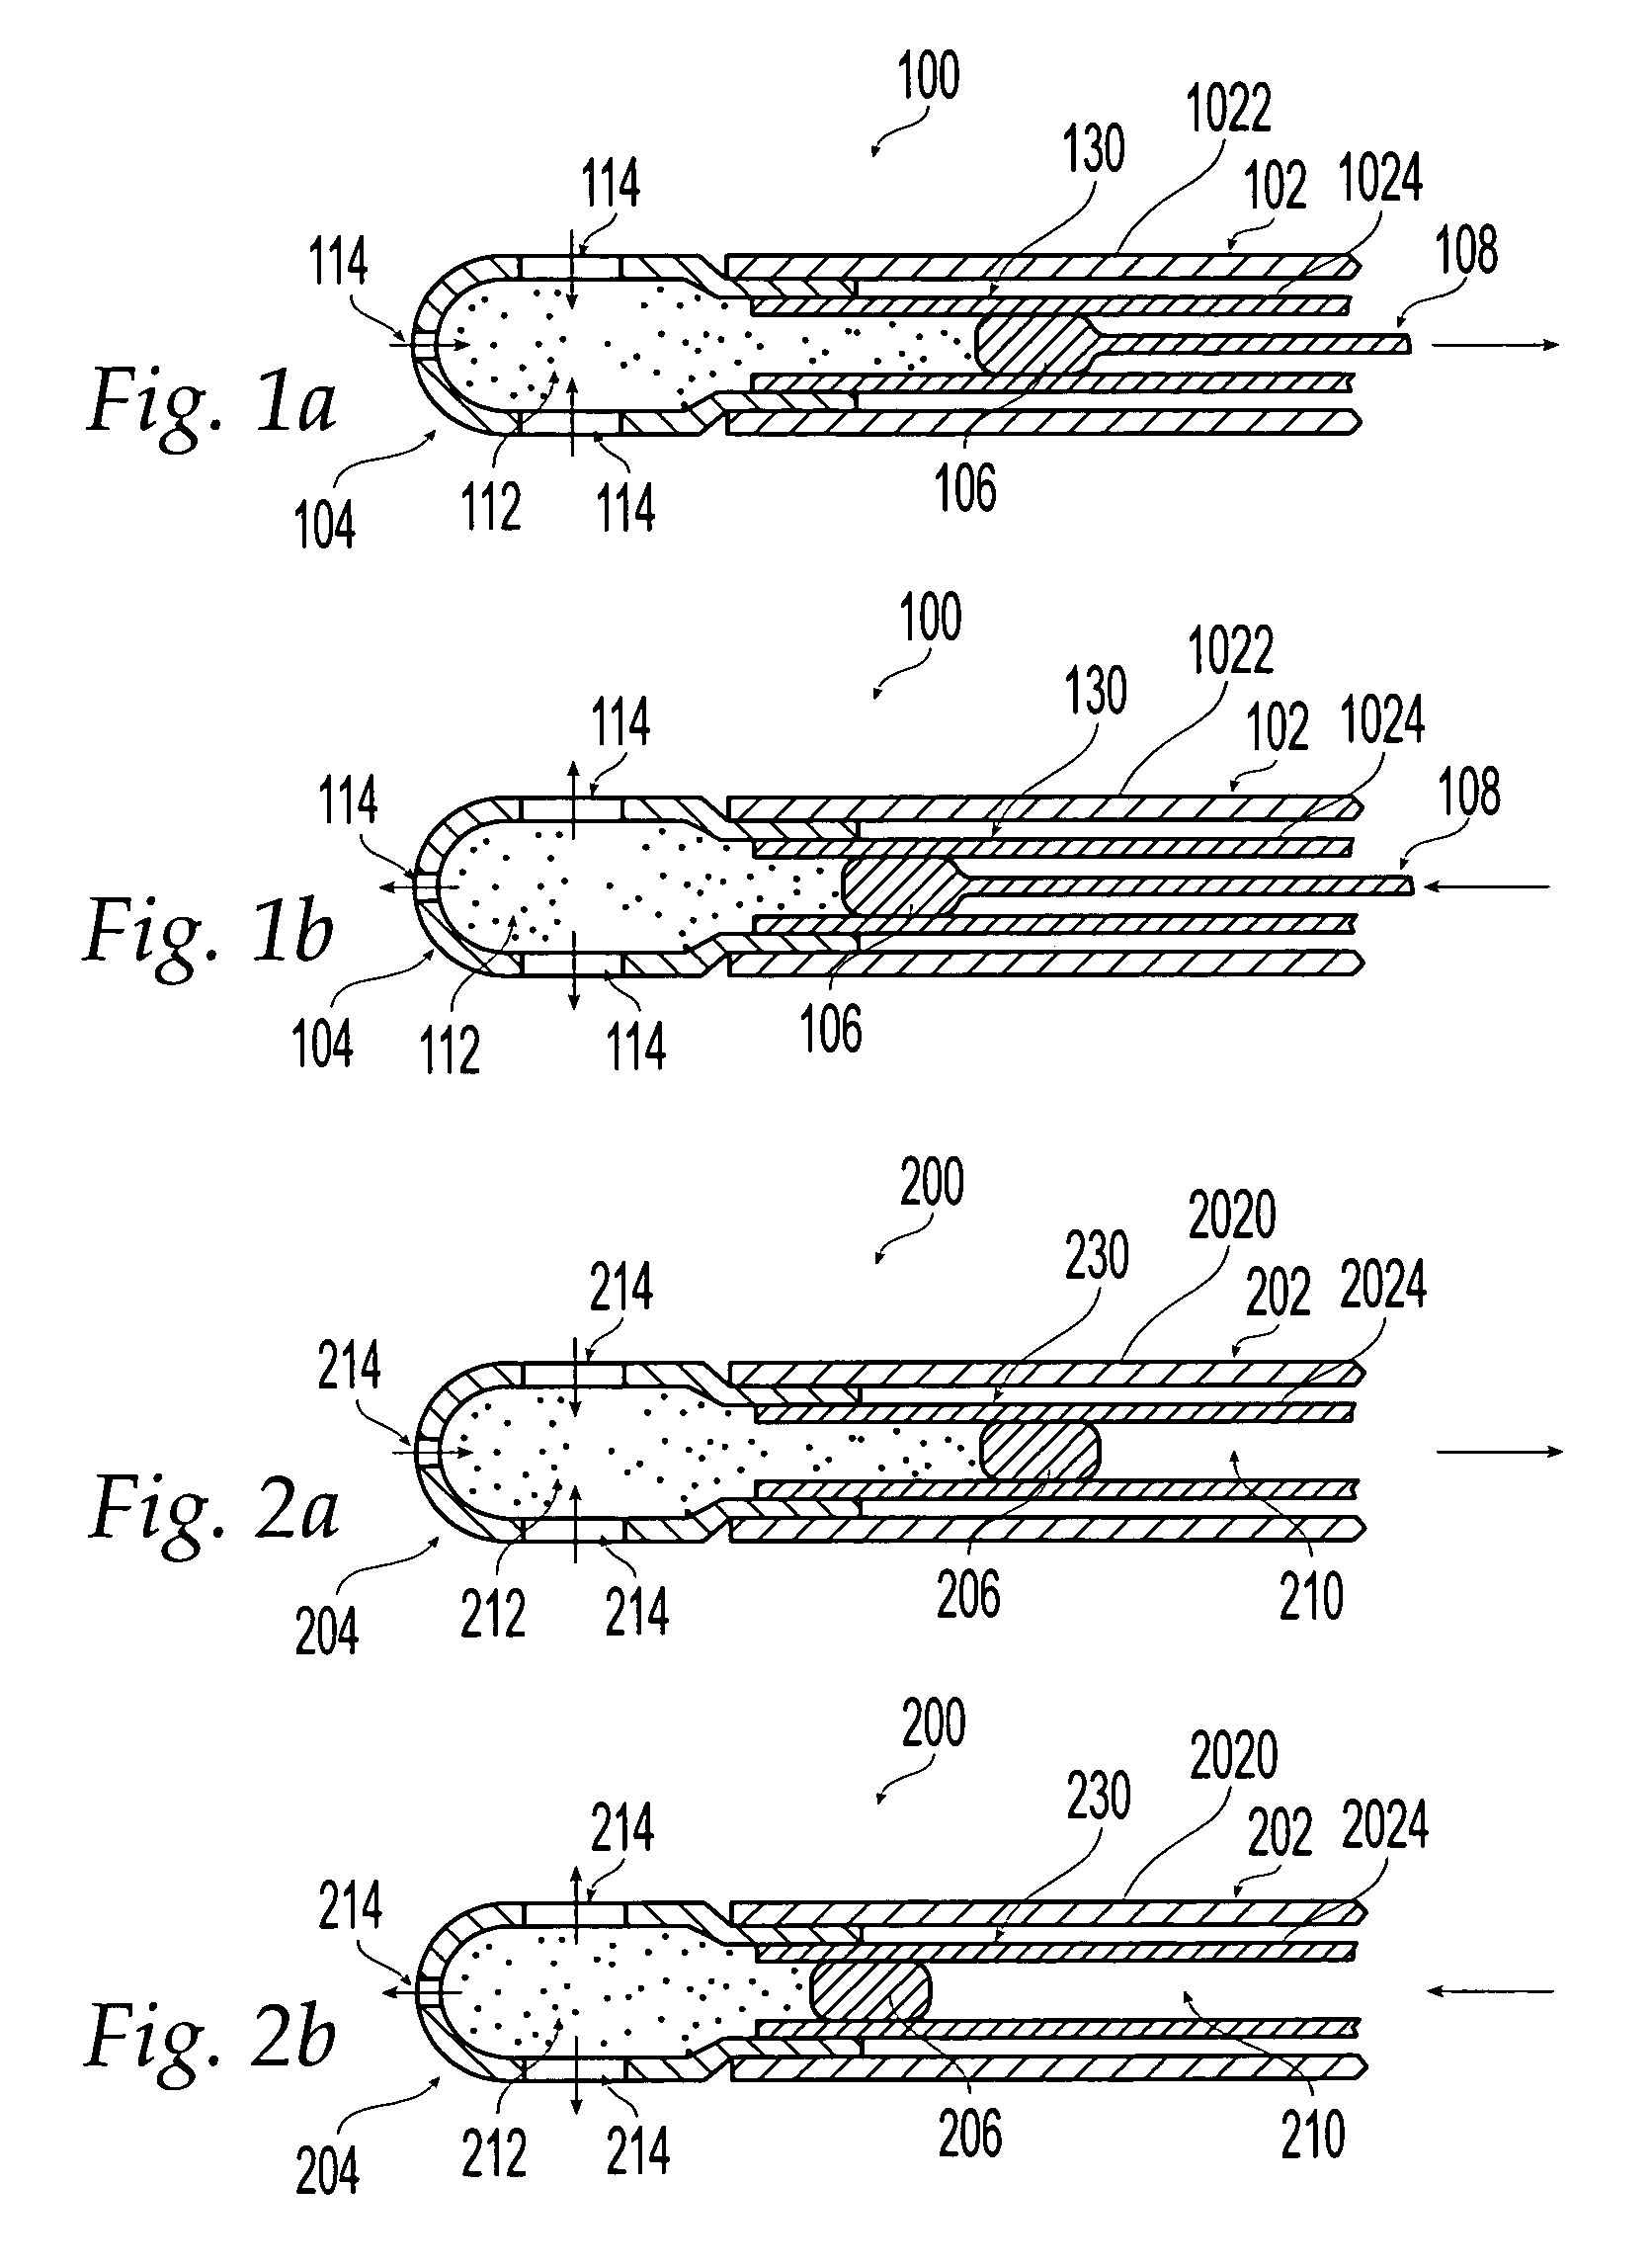 Cooled ablation catheter with reciprocating flow